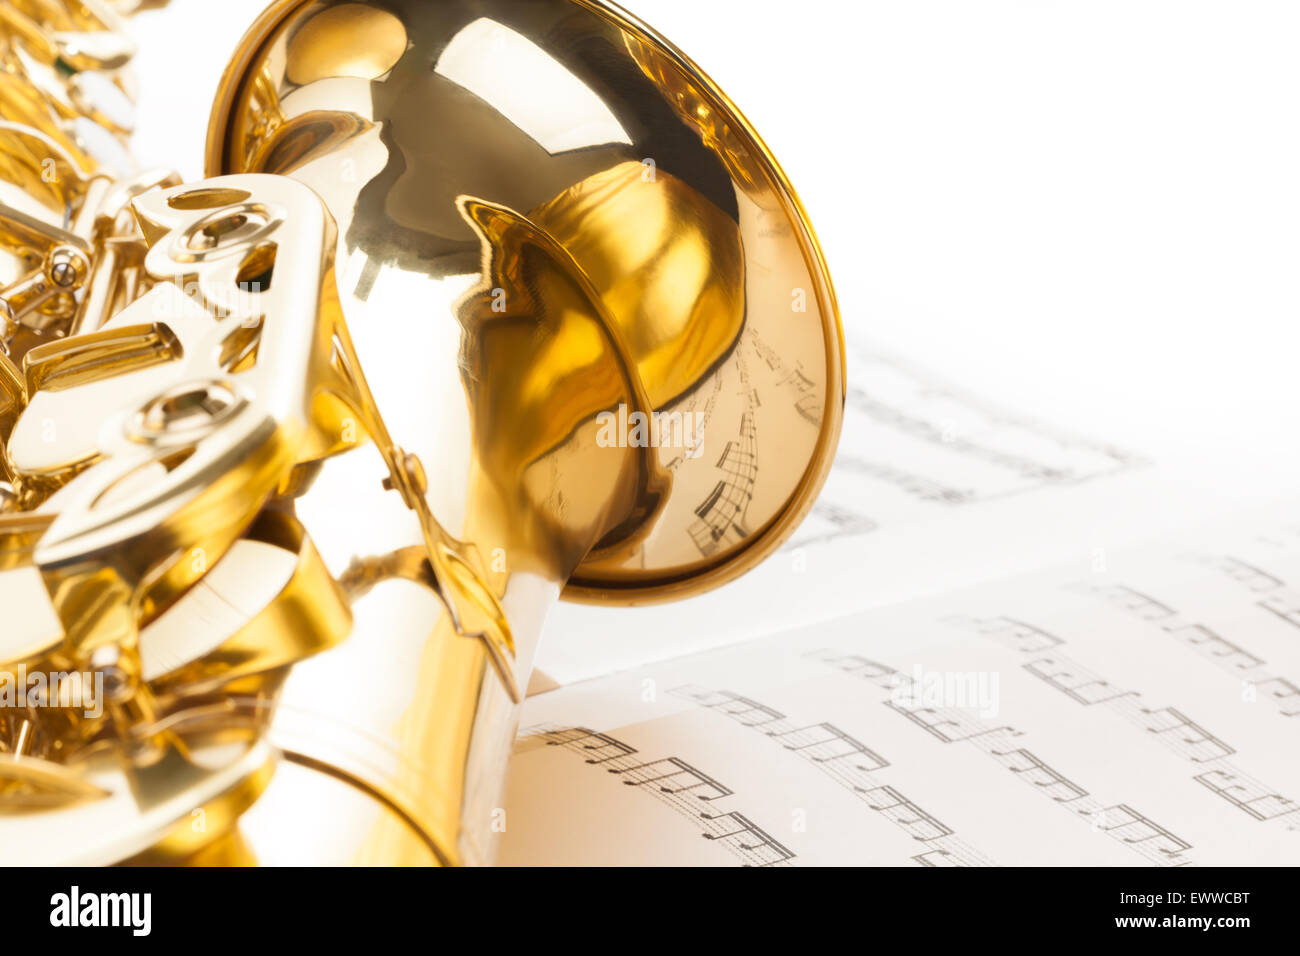 Alto saxophone with detailed view of bell Stock Photo